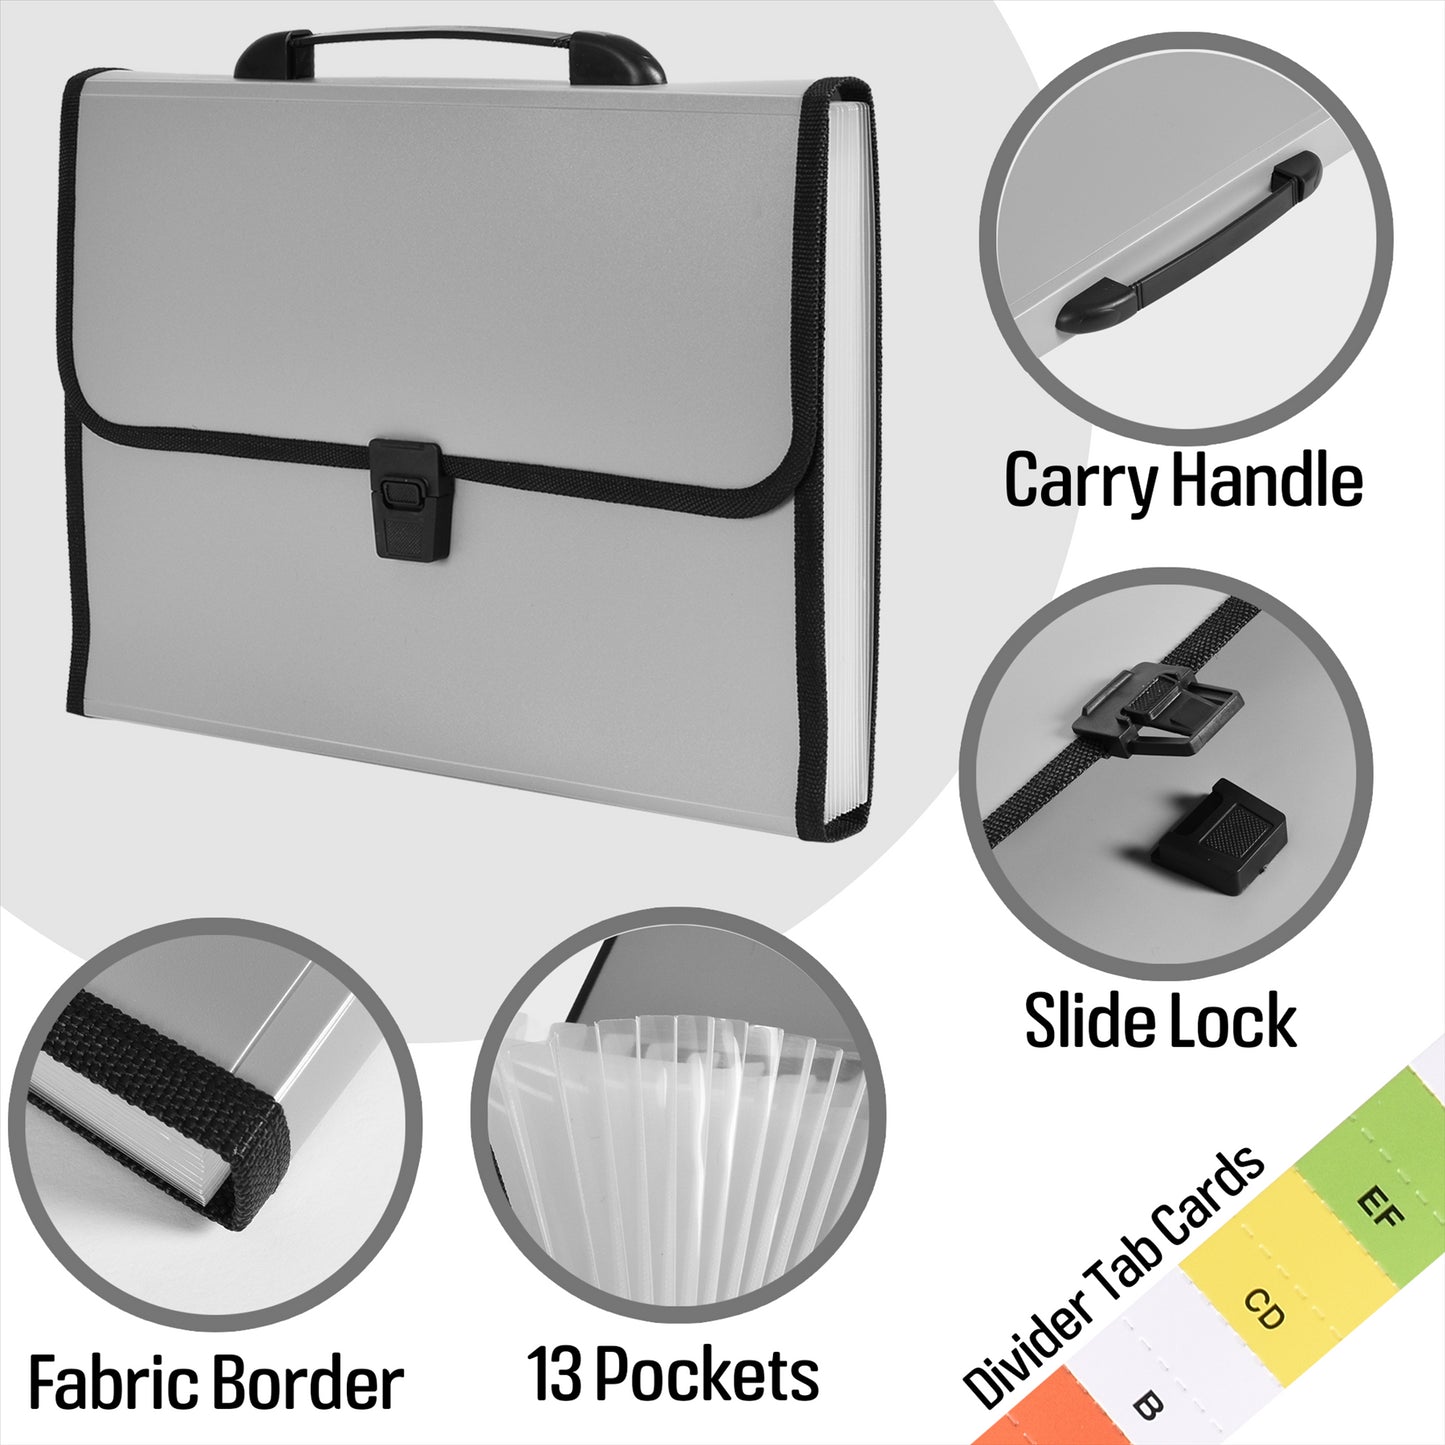 A4 Expanding File Folder With 13 Pockets For Organizing Documents